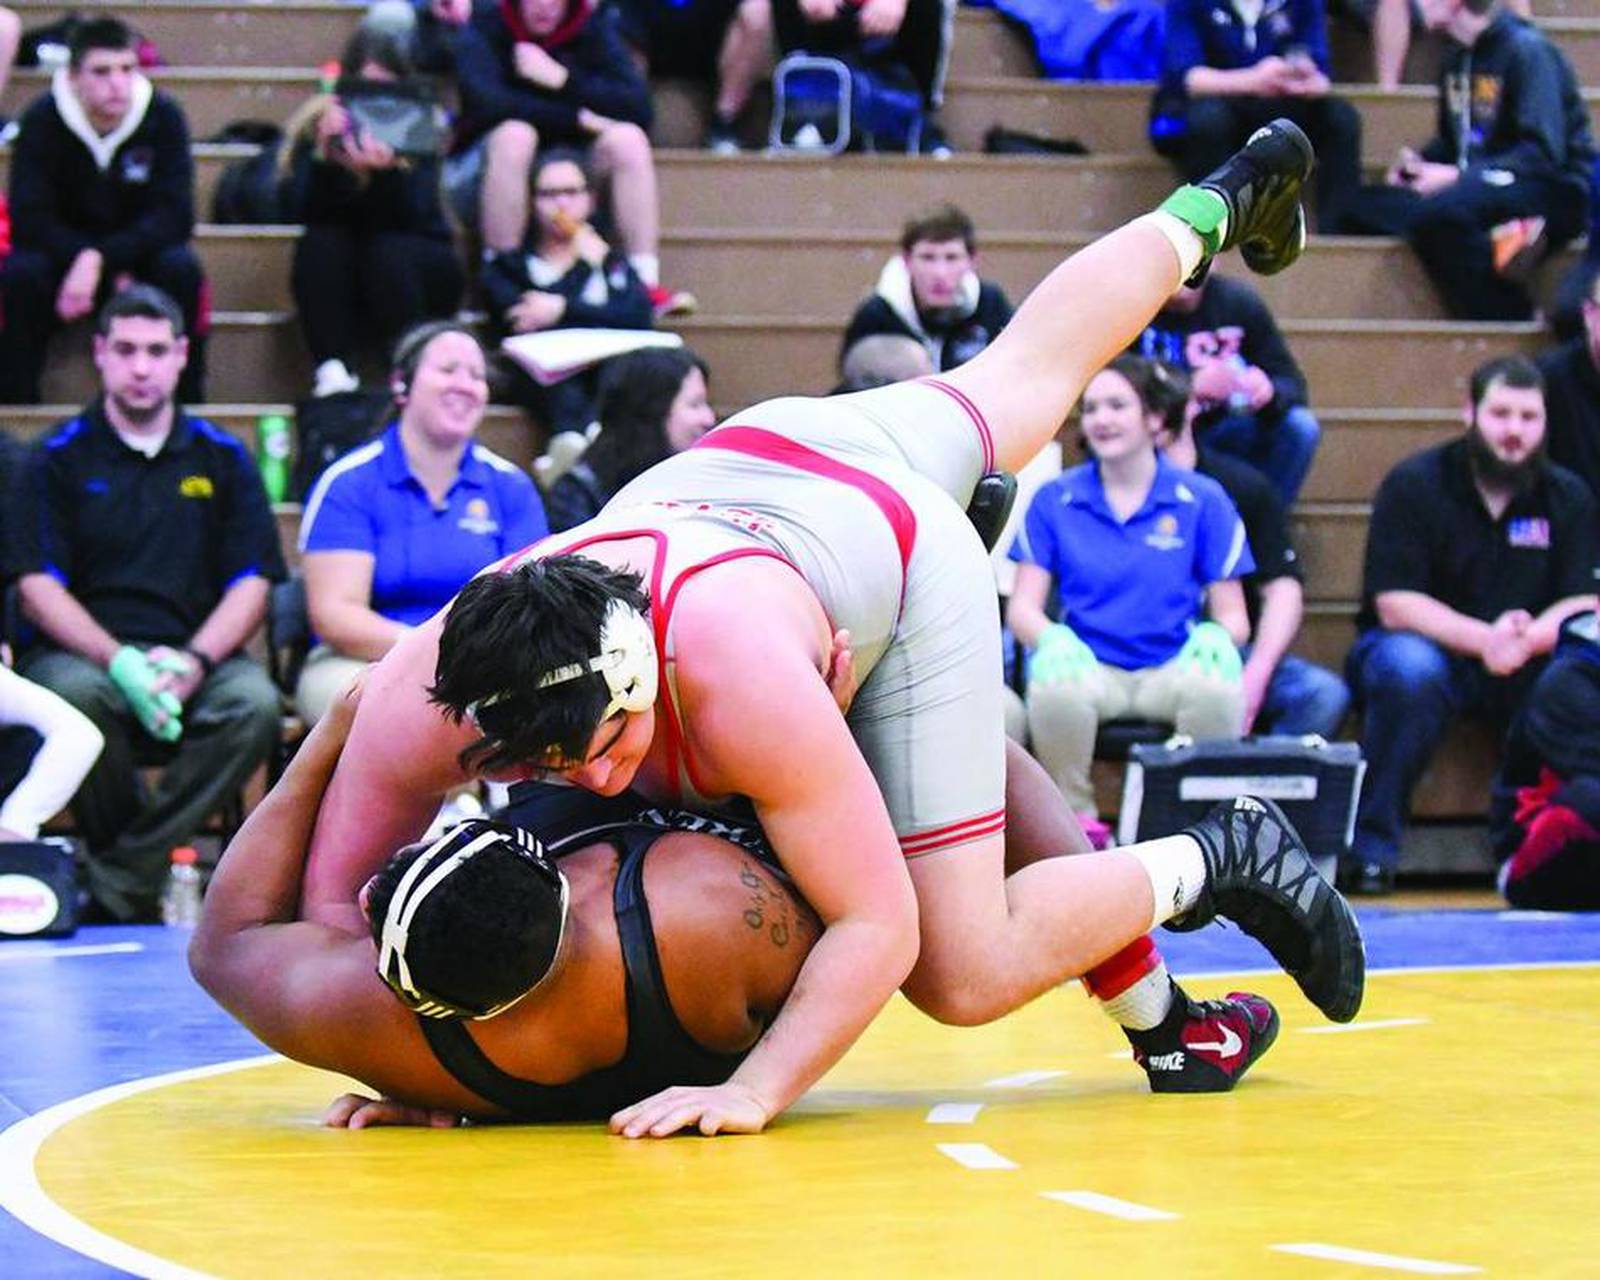 High school wrestling Hinsdale Central's Ivanisevic wins first